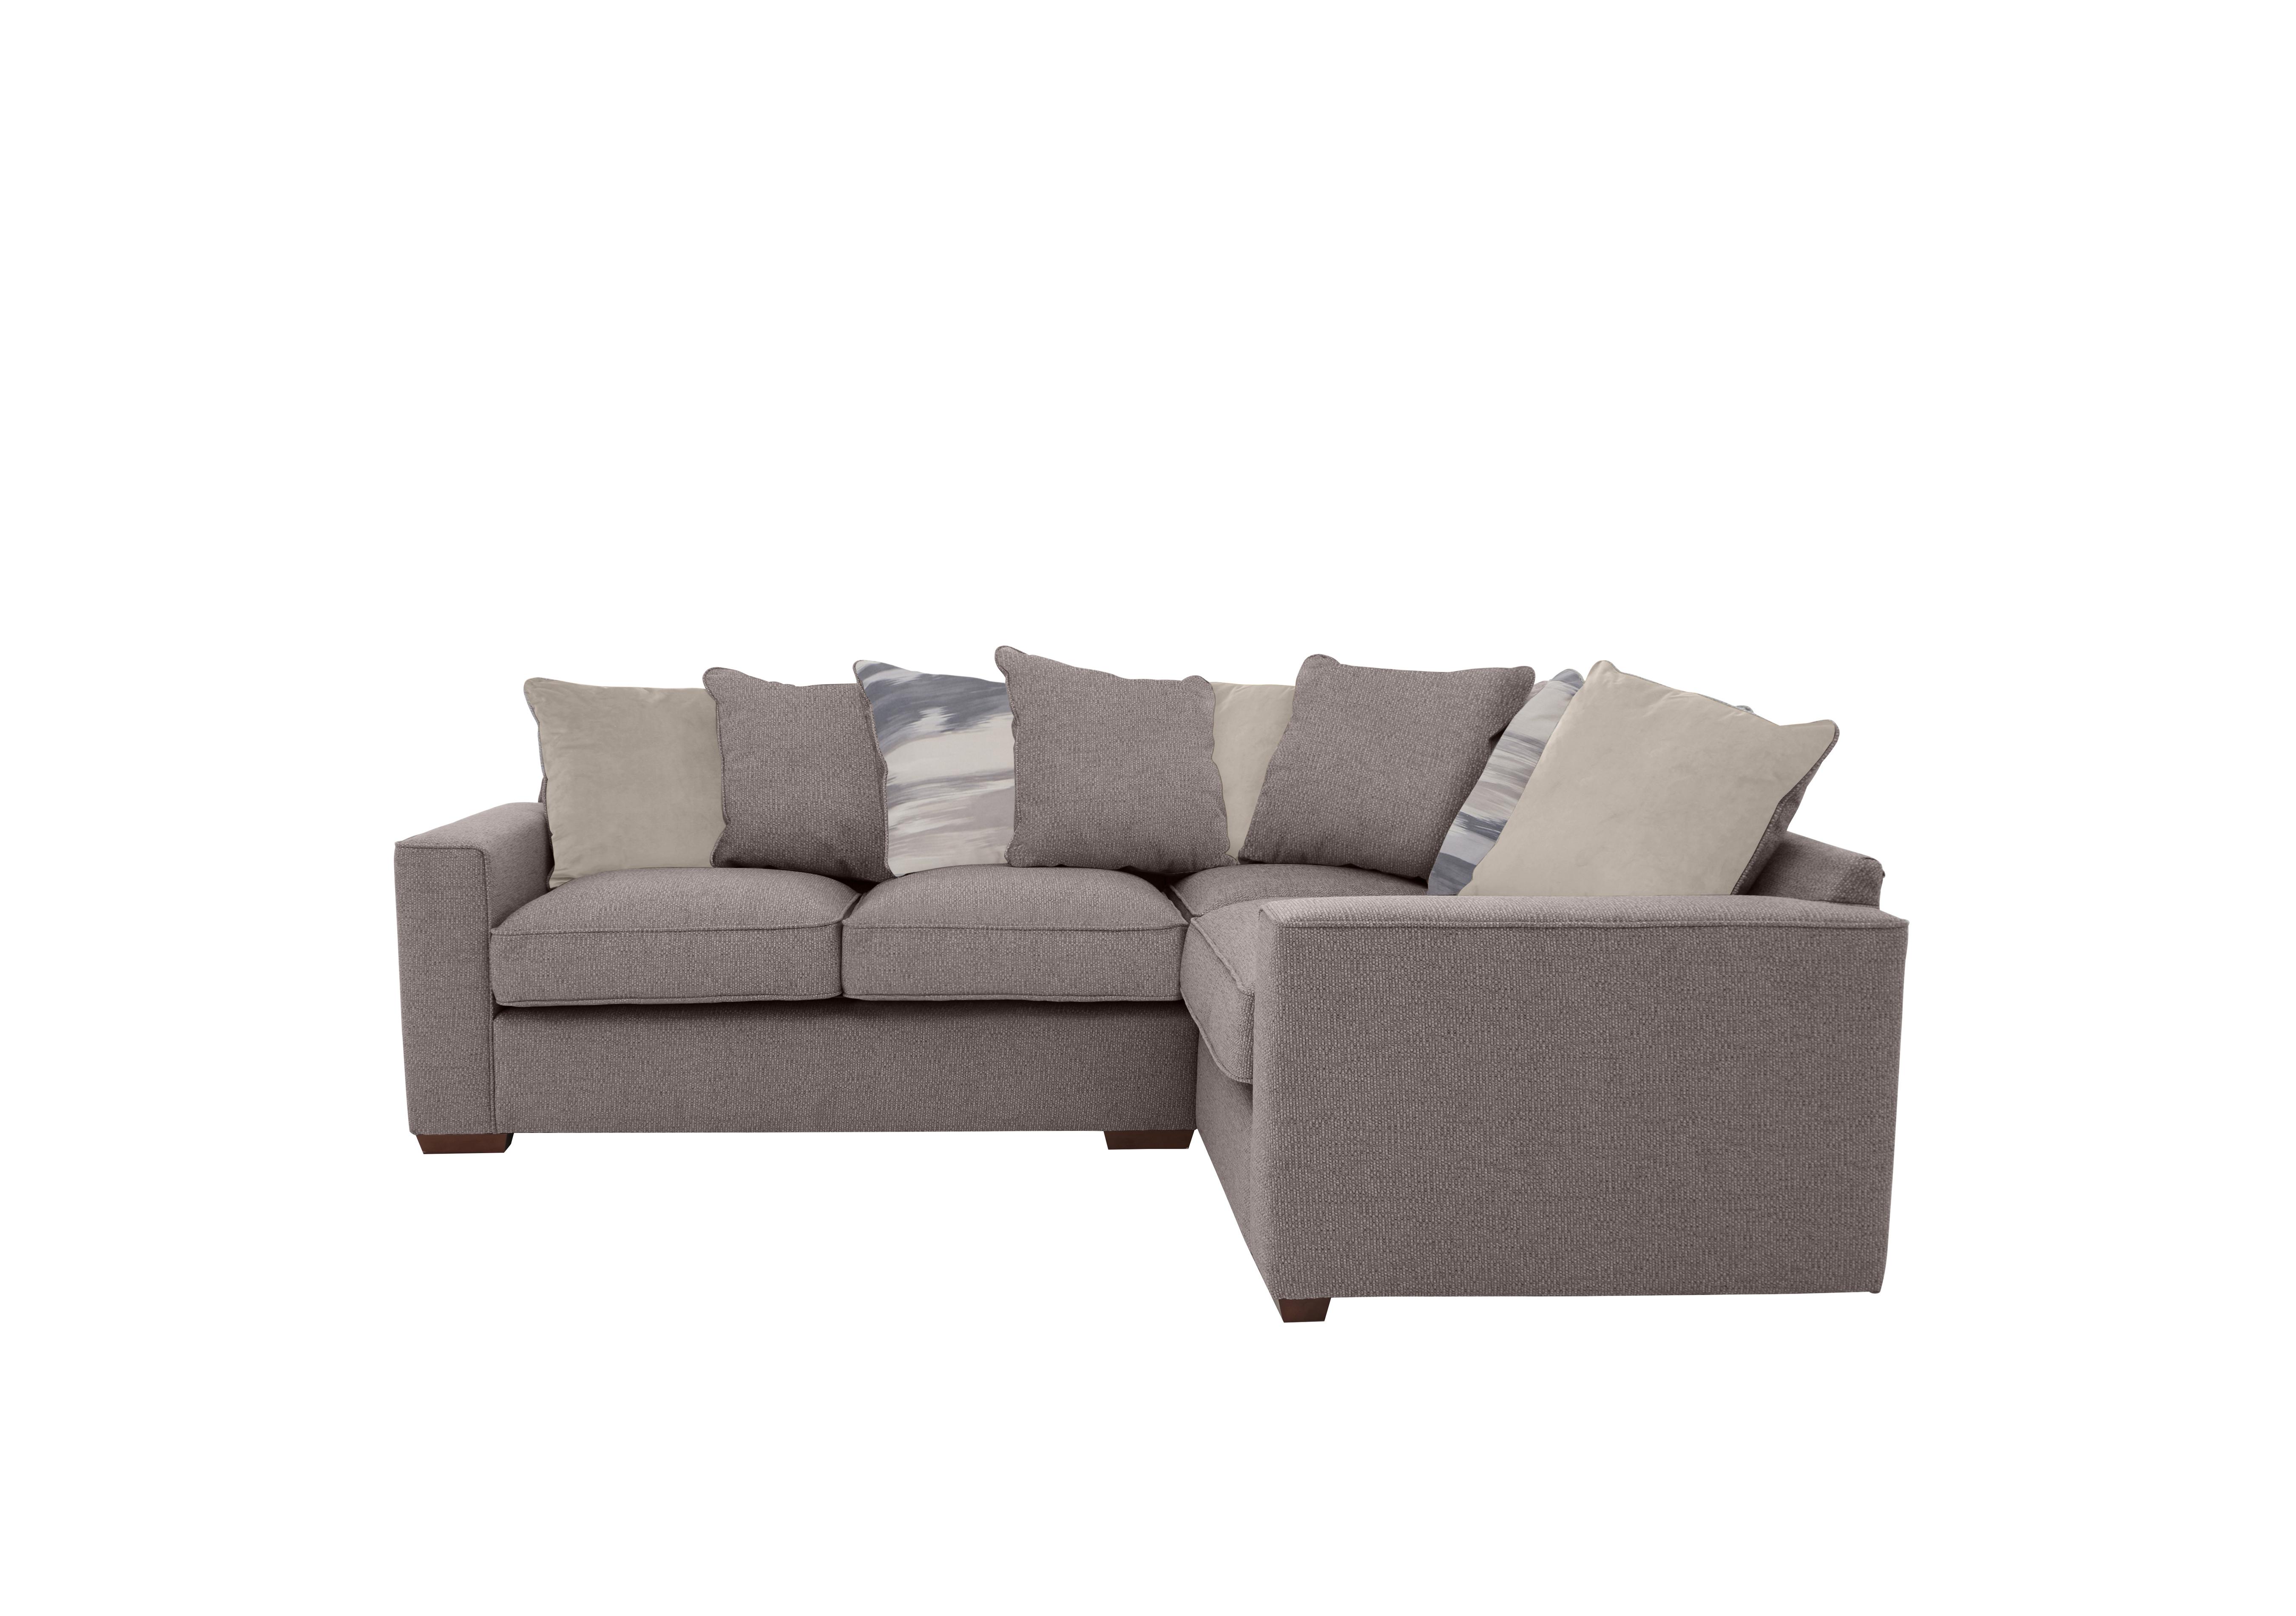 Cory Small Fabric Corner Scatter Back Sofa in Dallas Taupe Taupe Pack on Furniture Village